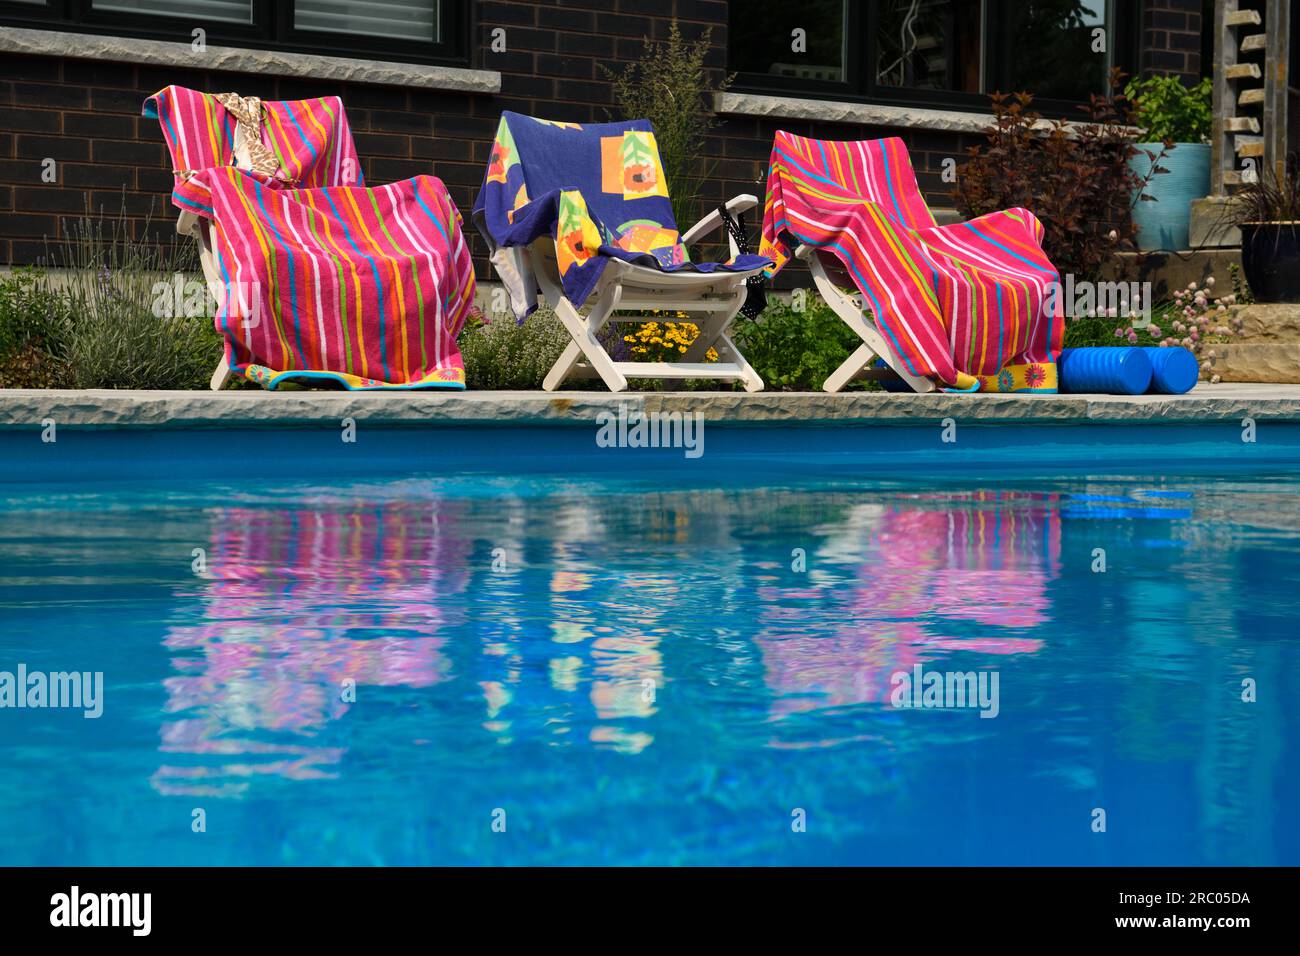 Pink beach towels reflected in rippling blue swimming pool water in backyard with garden Stock Photo